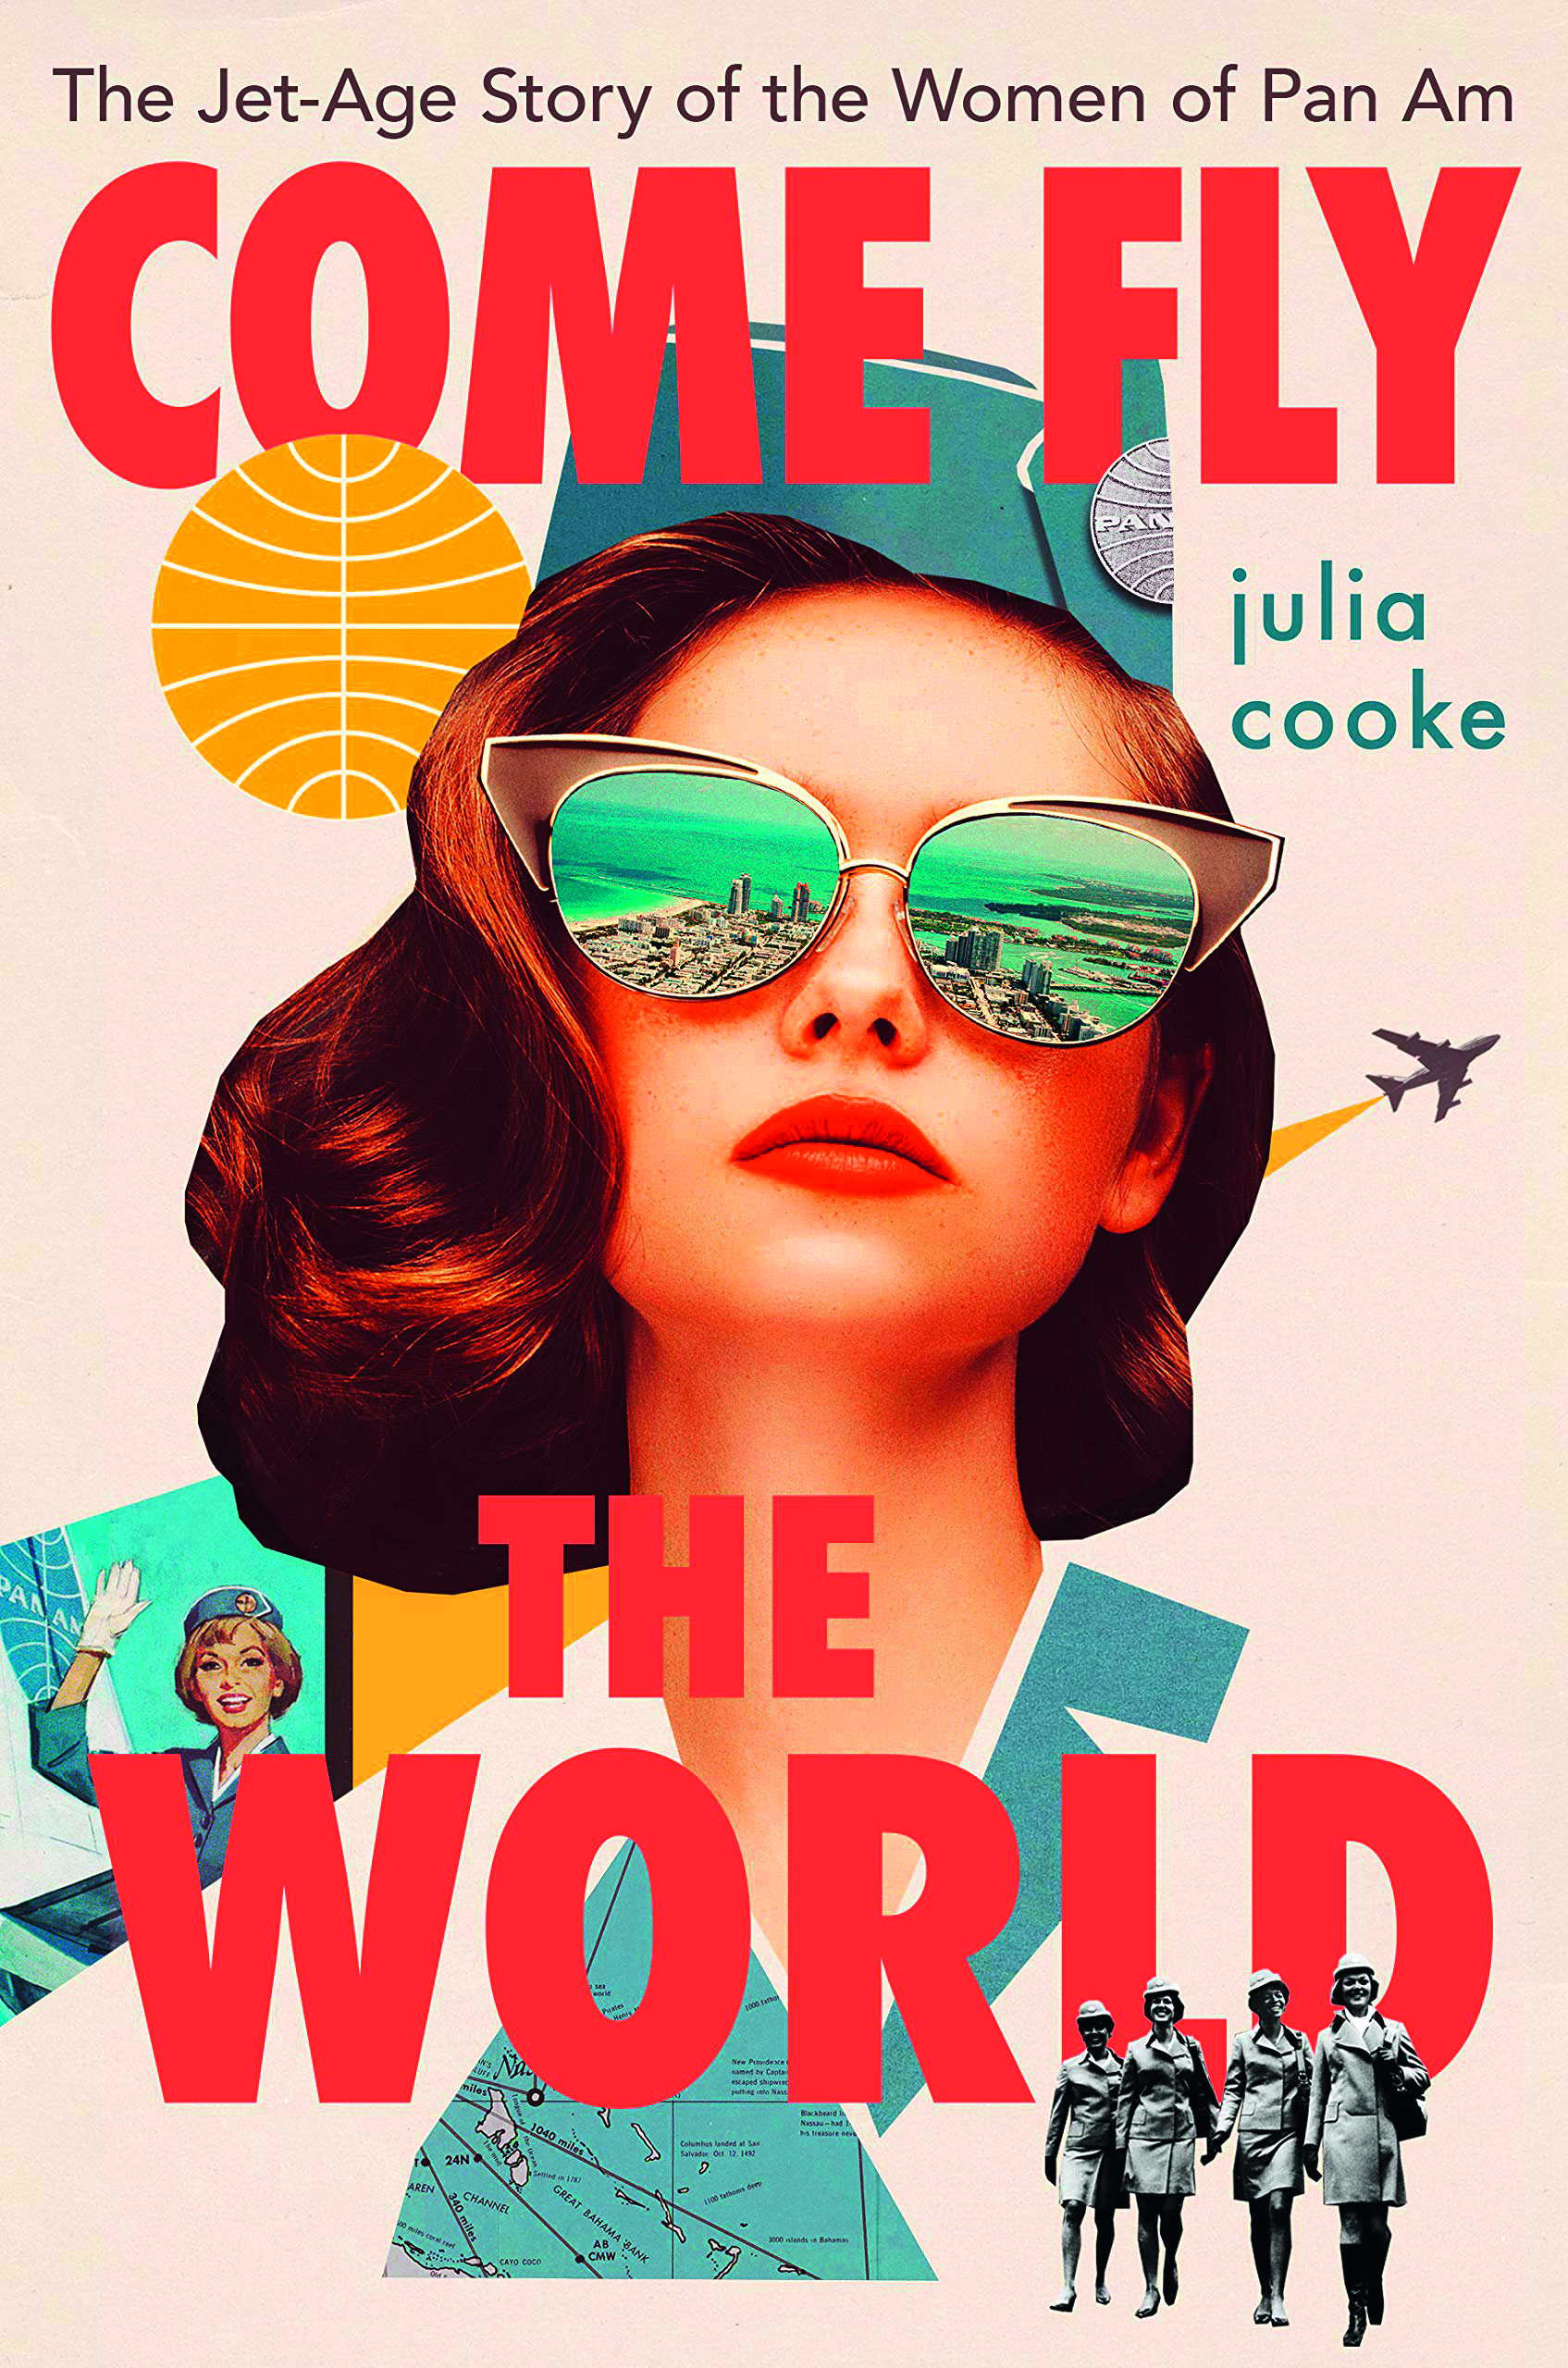 Come Fly the World: The Jet-Age Story of the Women of Pan Am, by Julia Cooke